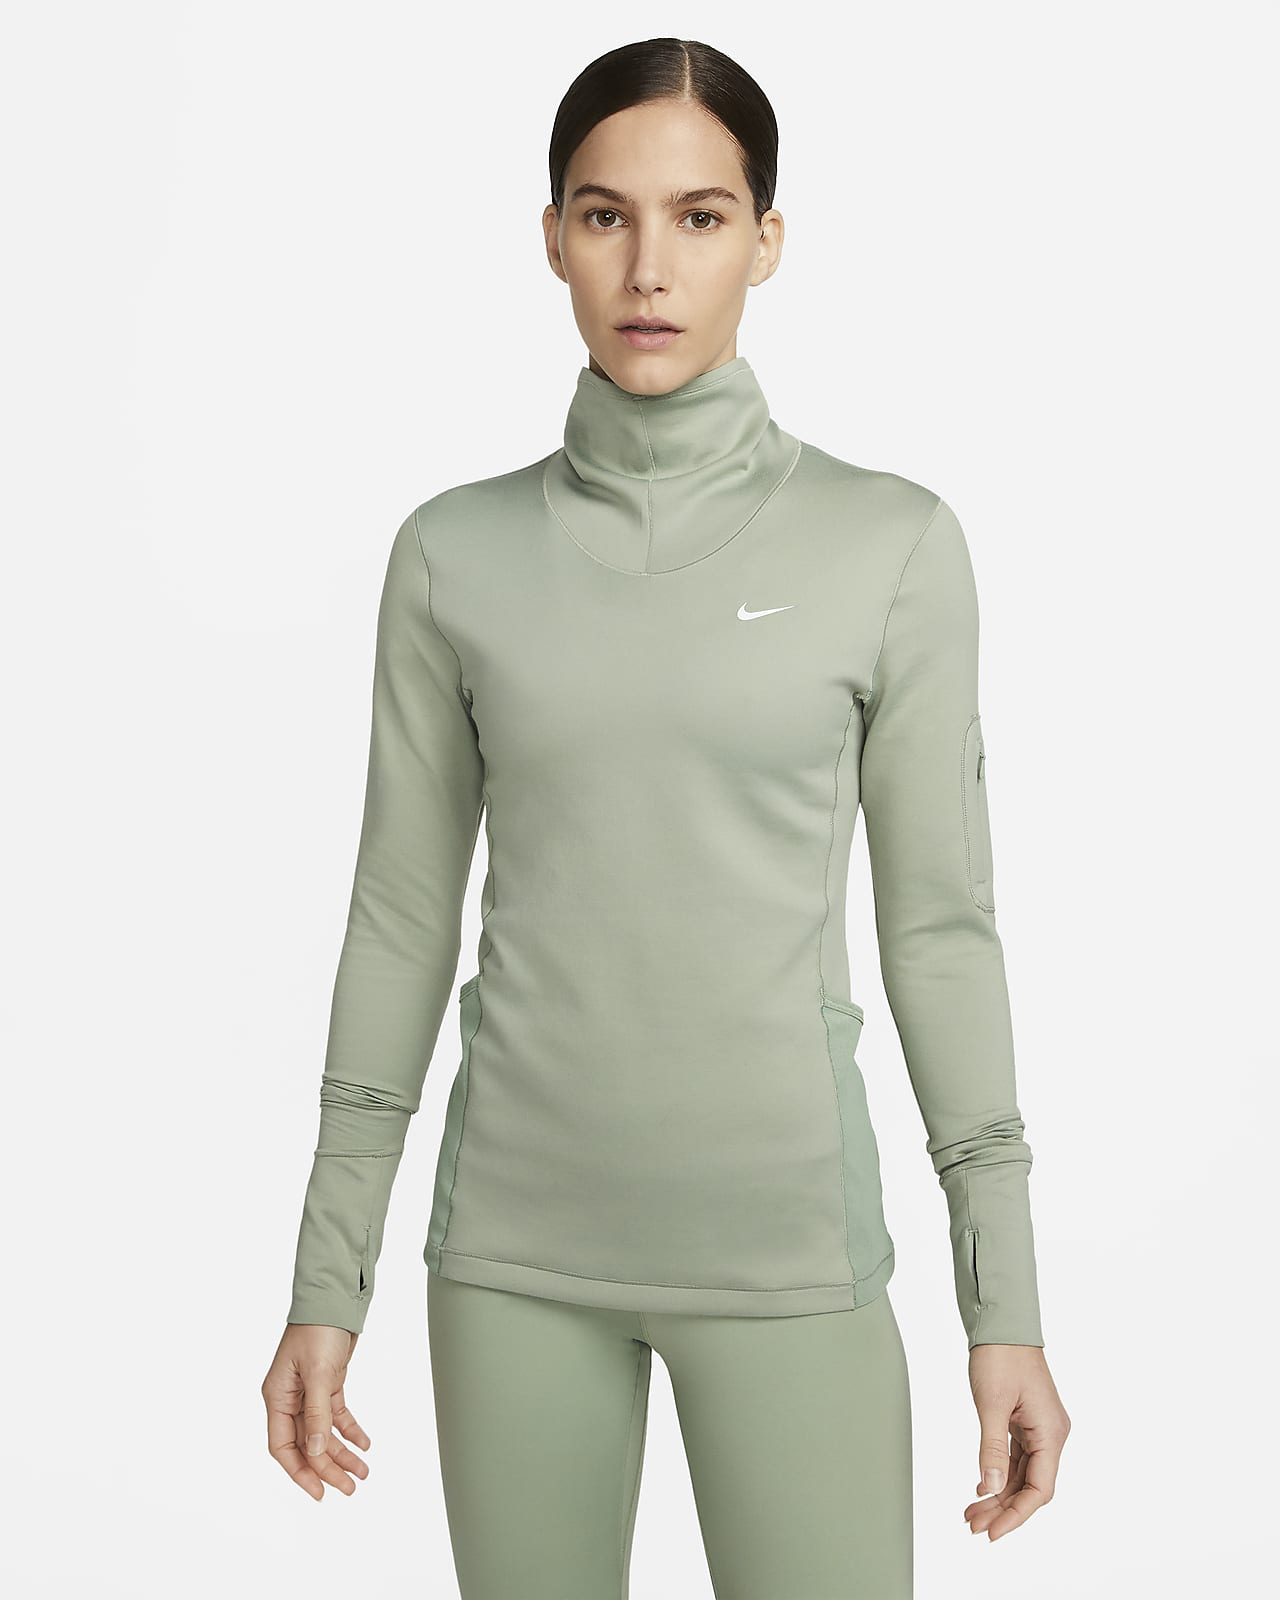 Therma-FIT Women's Long-Sleeve Top. Nike.com